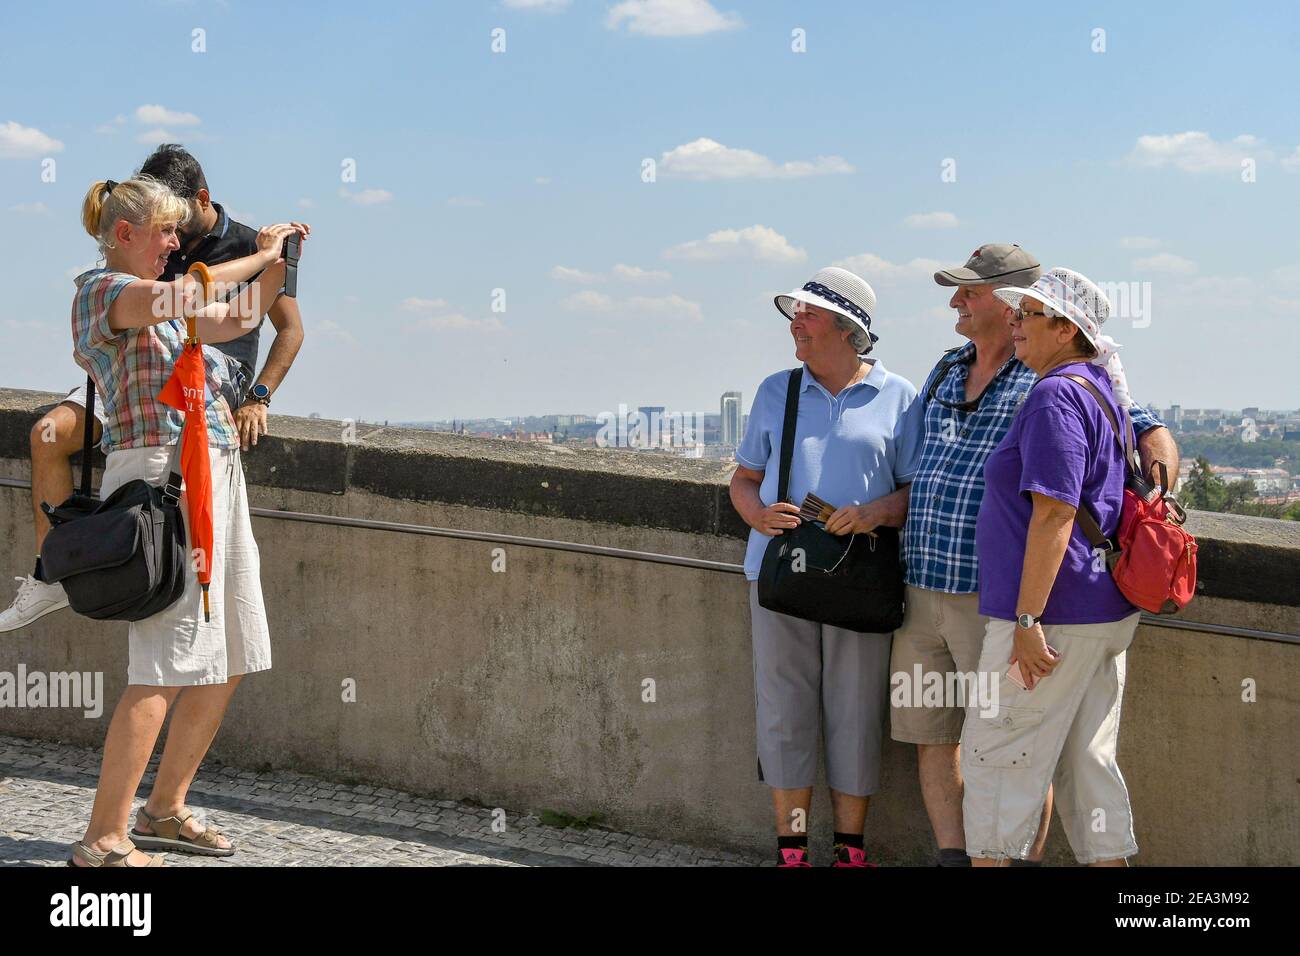 PRAGUE, CZECH REPUBLIC - JULY 2018: Person taking a picture of people posing together at a viewing point near Prague Castle Stock Photo